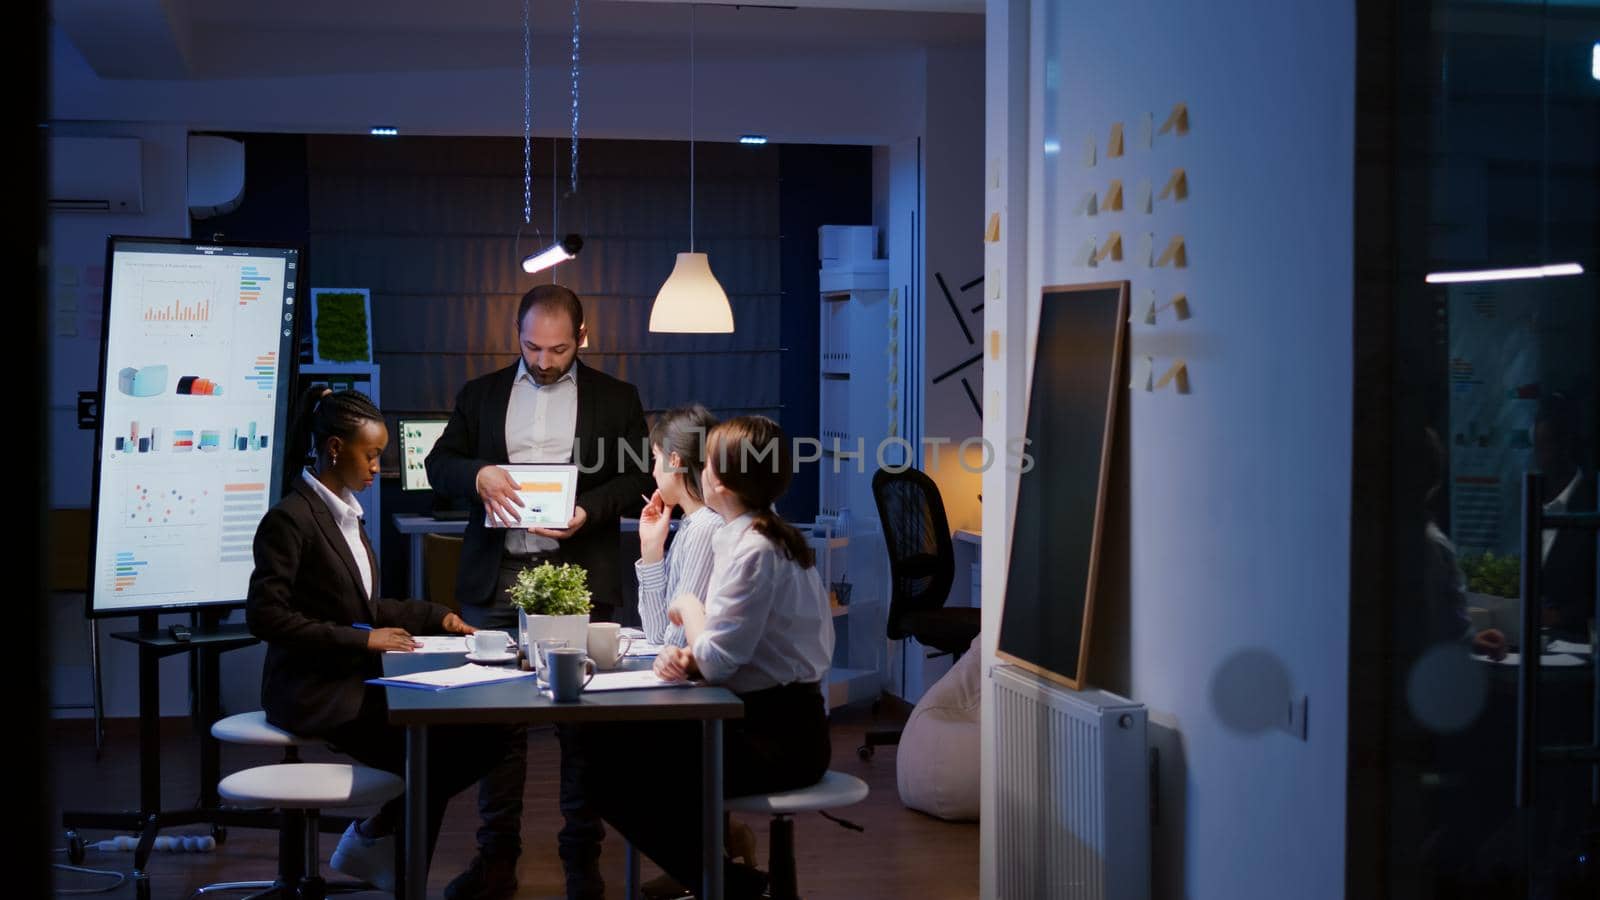 Workaholic overworked businessman explaining company strategy using tablet for presentation working overtime in meeting office room late at night. Diverse multi-ethnic teamwork brainstorming ideas